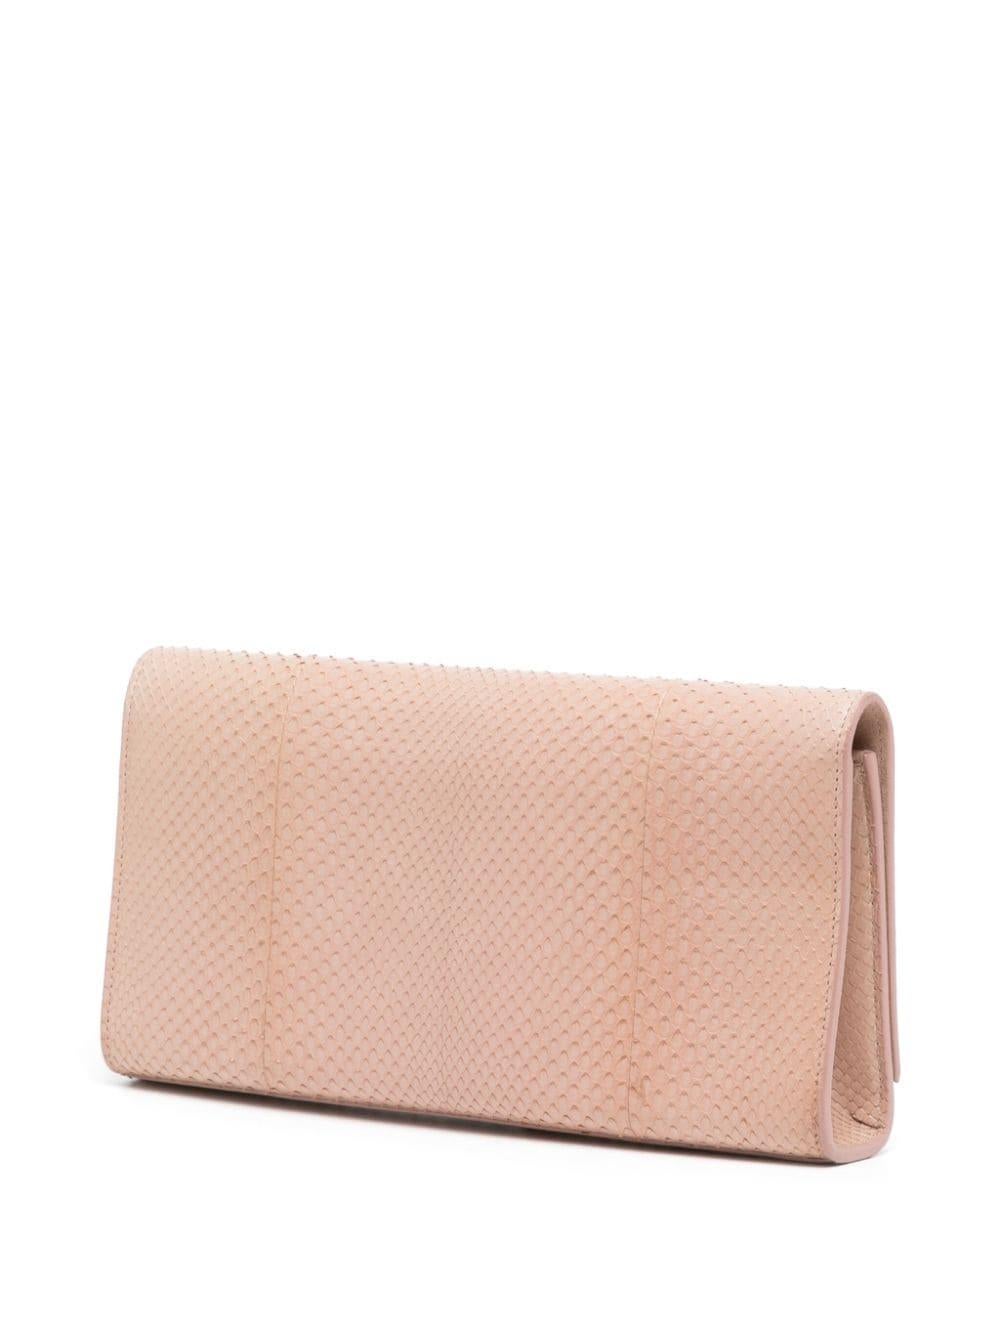 * Blush pink
* Exotic leather
* Signature YSL logo plaque
* Large tassel detail
* Fold over top
* Concealed magnetic fastening
* Main compartment, internal card slot & internal logo patch
* Very Good Condition: This pre-loved piece shows minimal